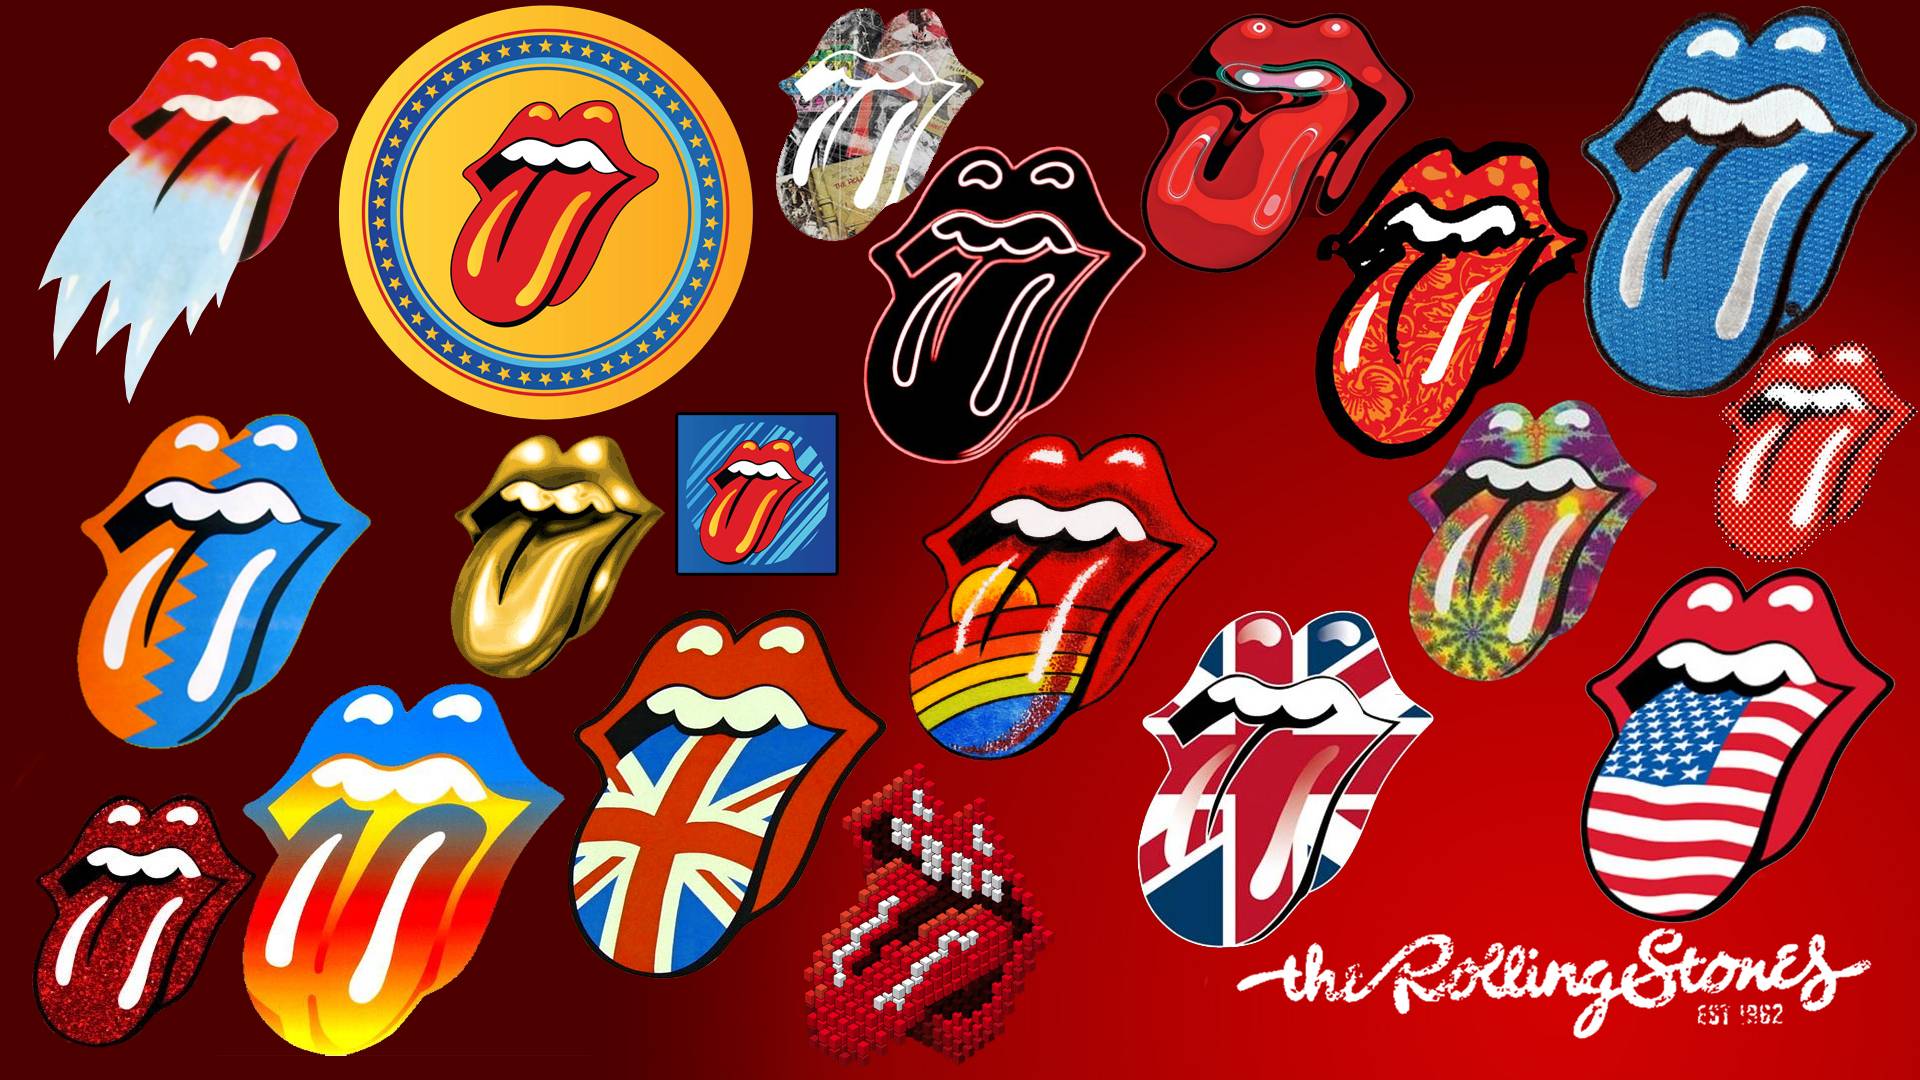 Wallpaper For > The Rolling Stones Wallpaper iPhone